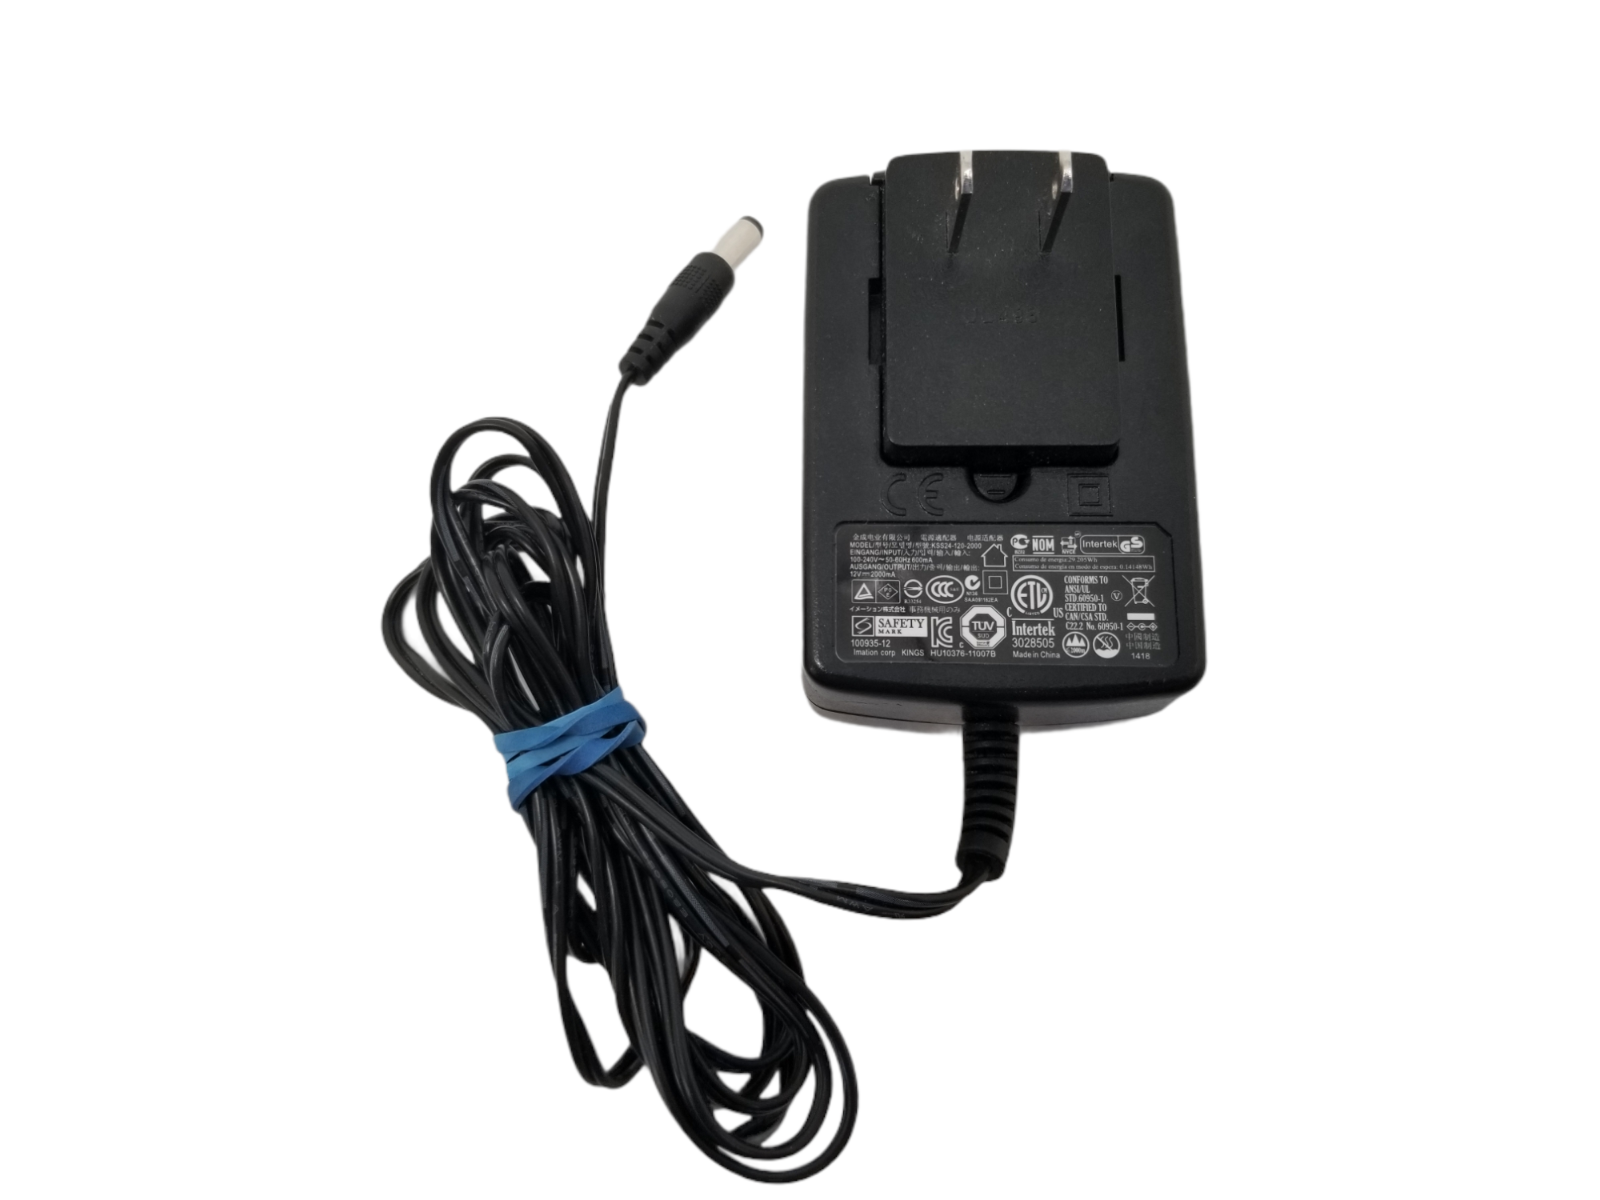 OEM AC/DC Adapter Cord For Intertek Kings KSS24-120-2000 Power Supply Charger Type: AC/DC Adapter Compatible Model: